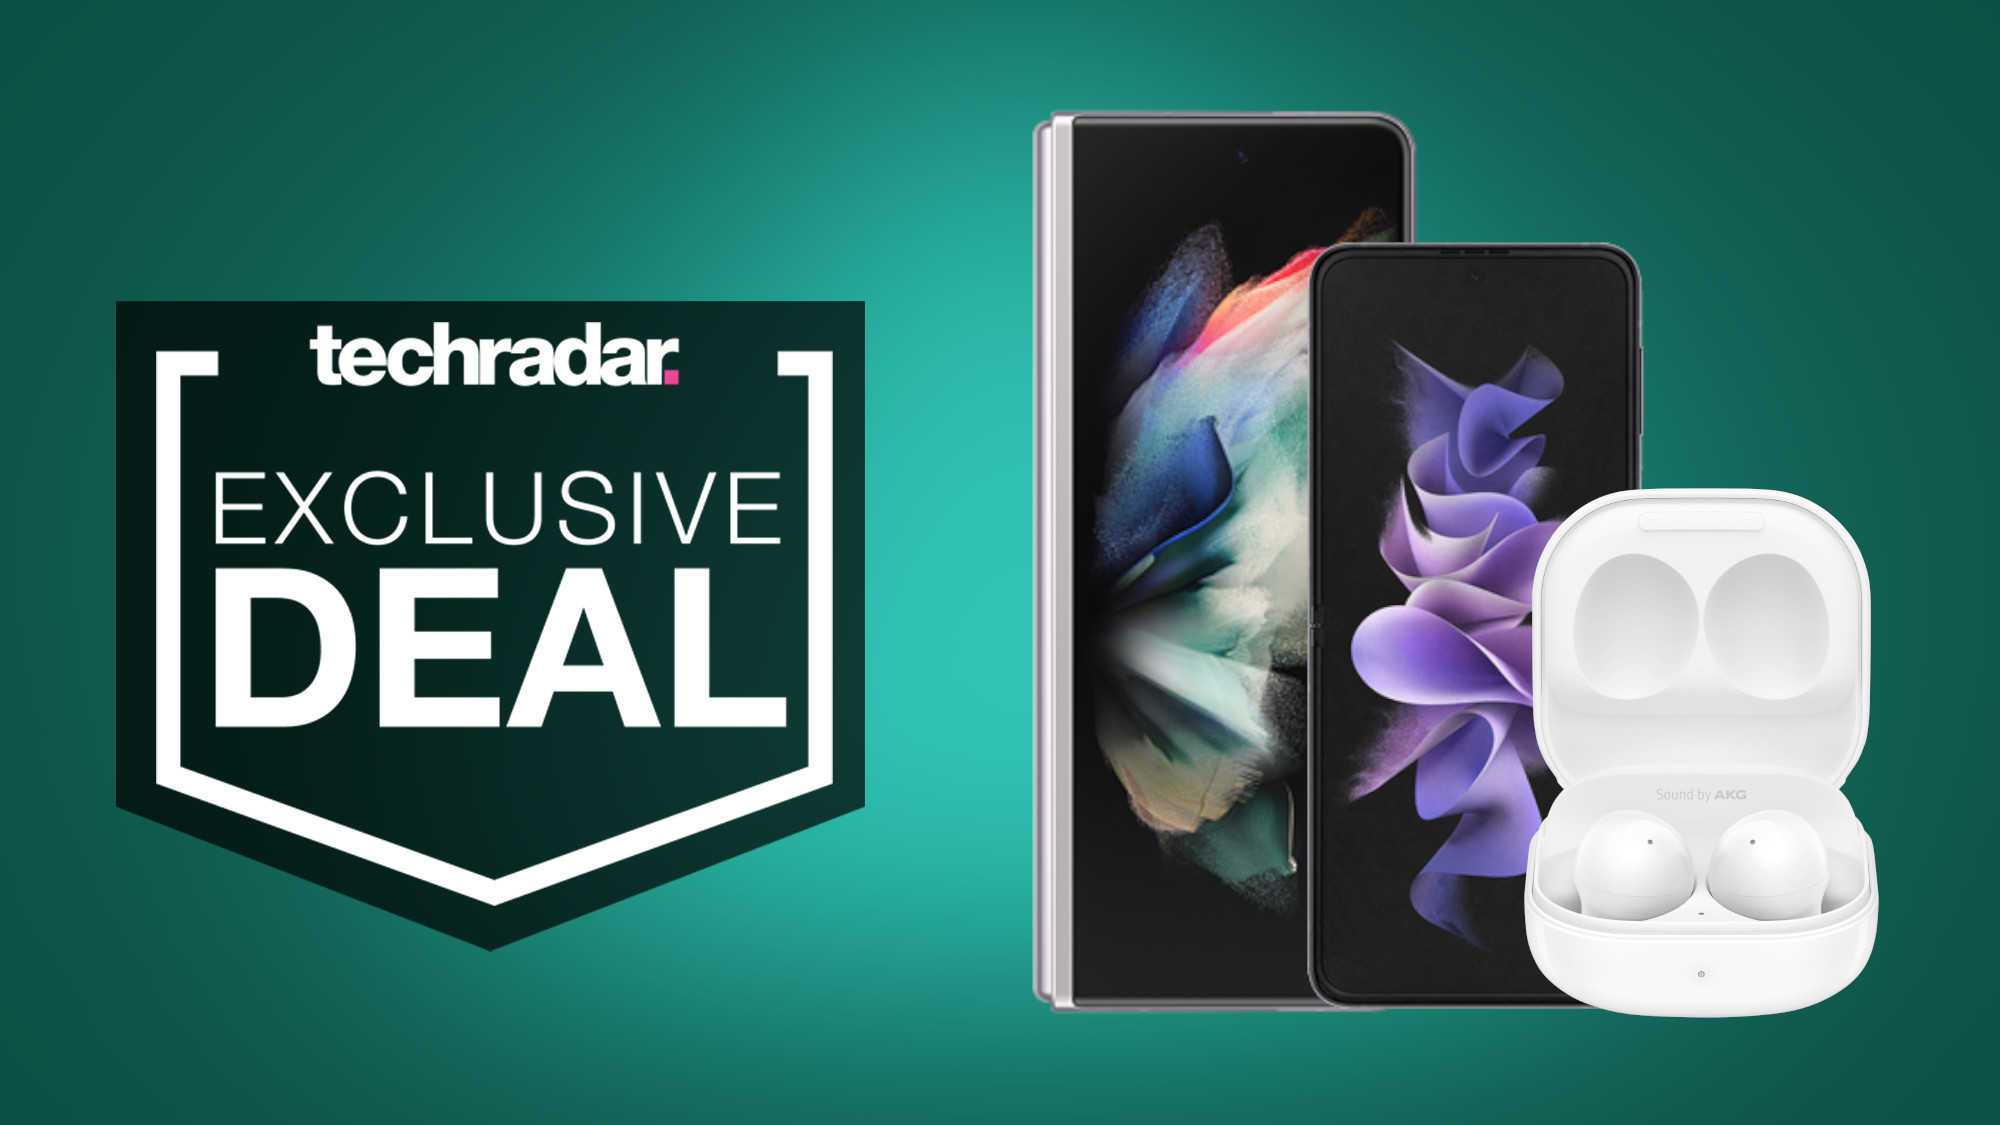 Exclusive: save $250 on the Galaxy Fold and Flip 3 with Samsung's Black Friday deals thumbnail